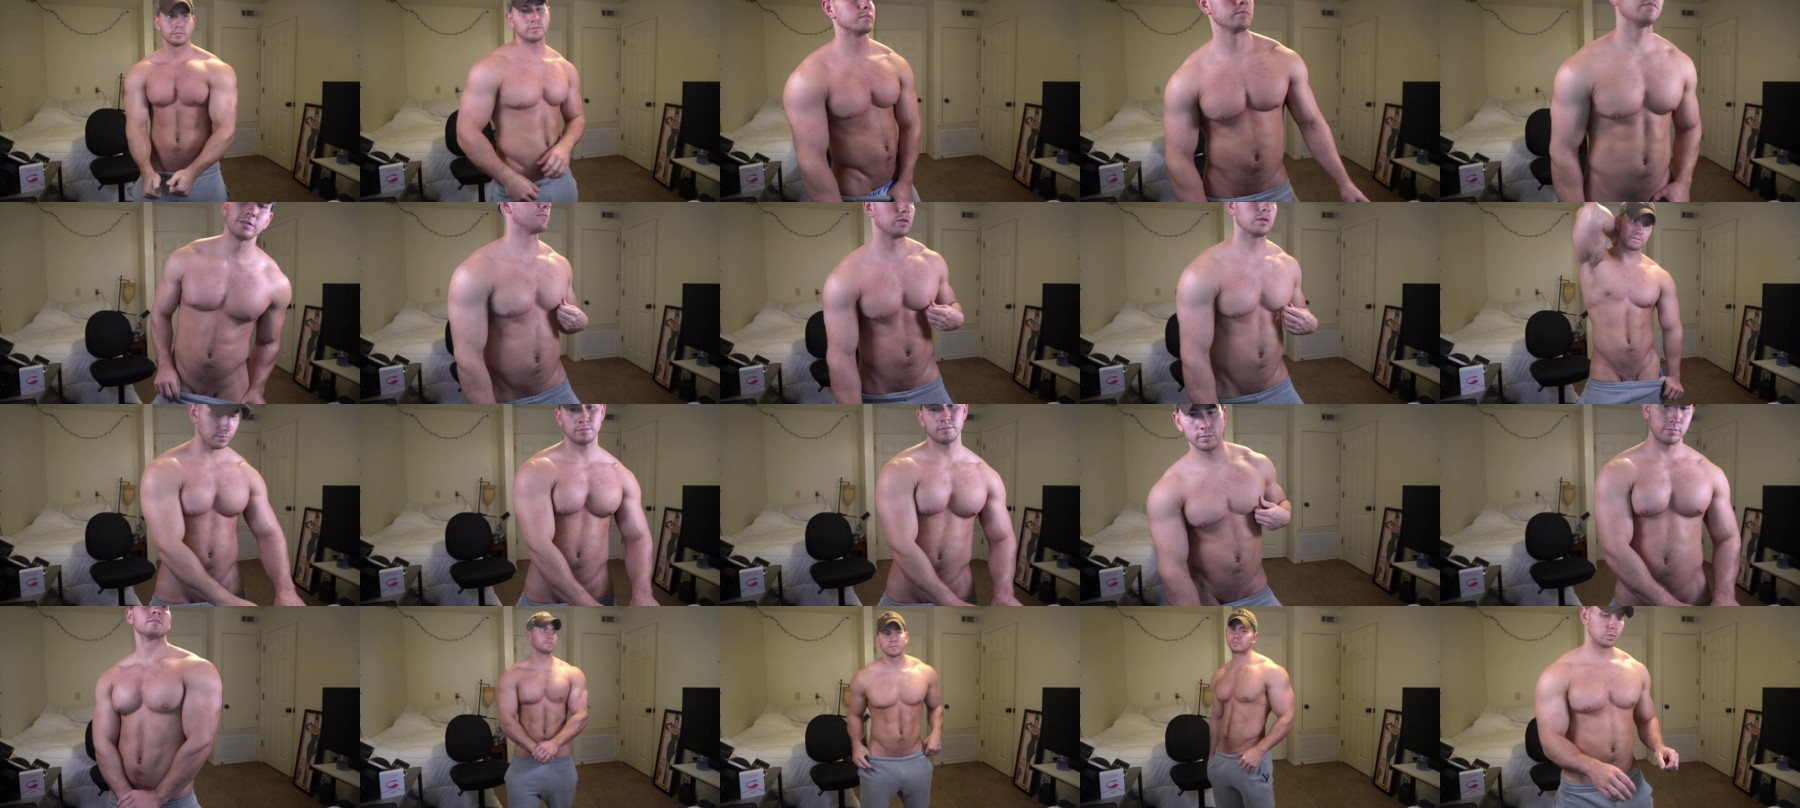 Hotmuscles6t9 Nude CAM SHOW @ Chaturbate 20-05-2021